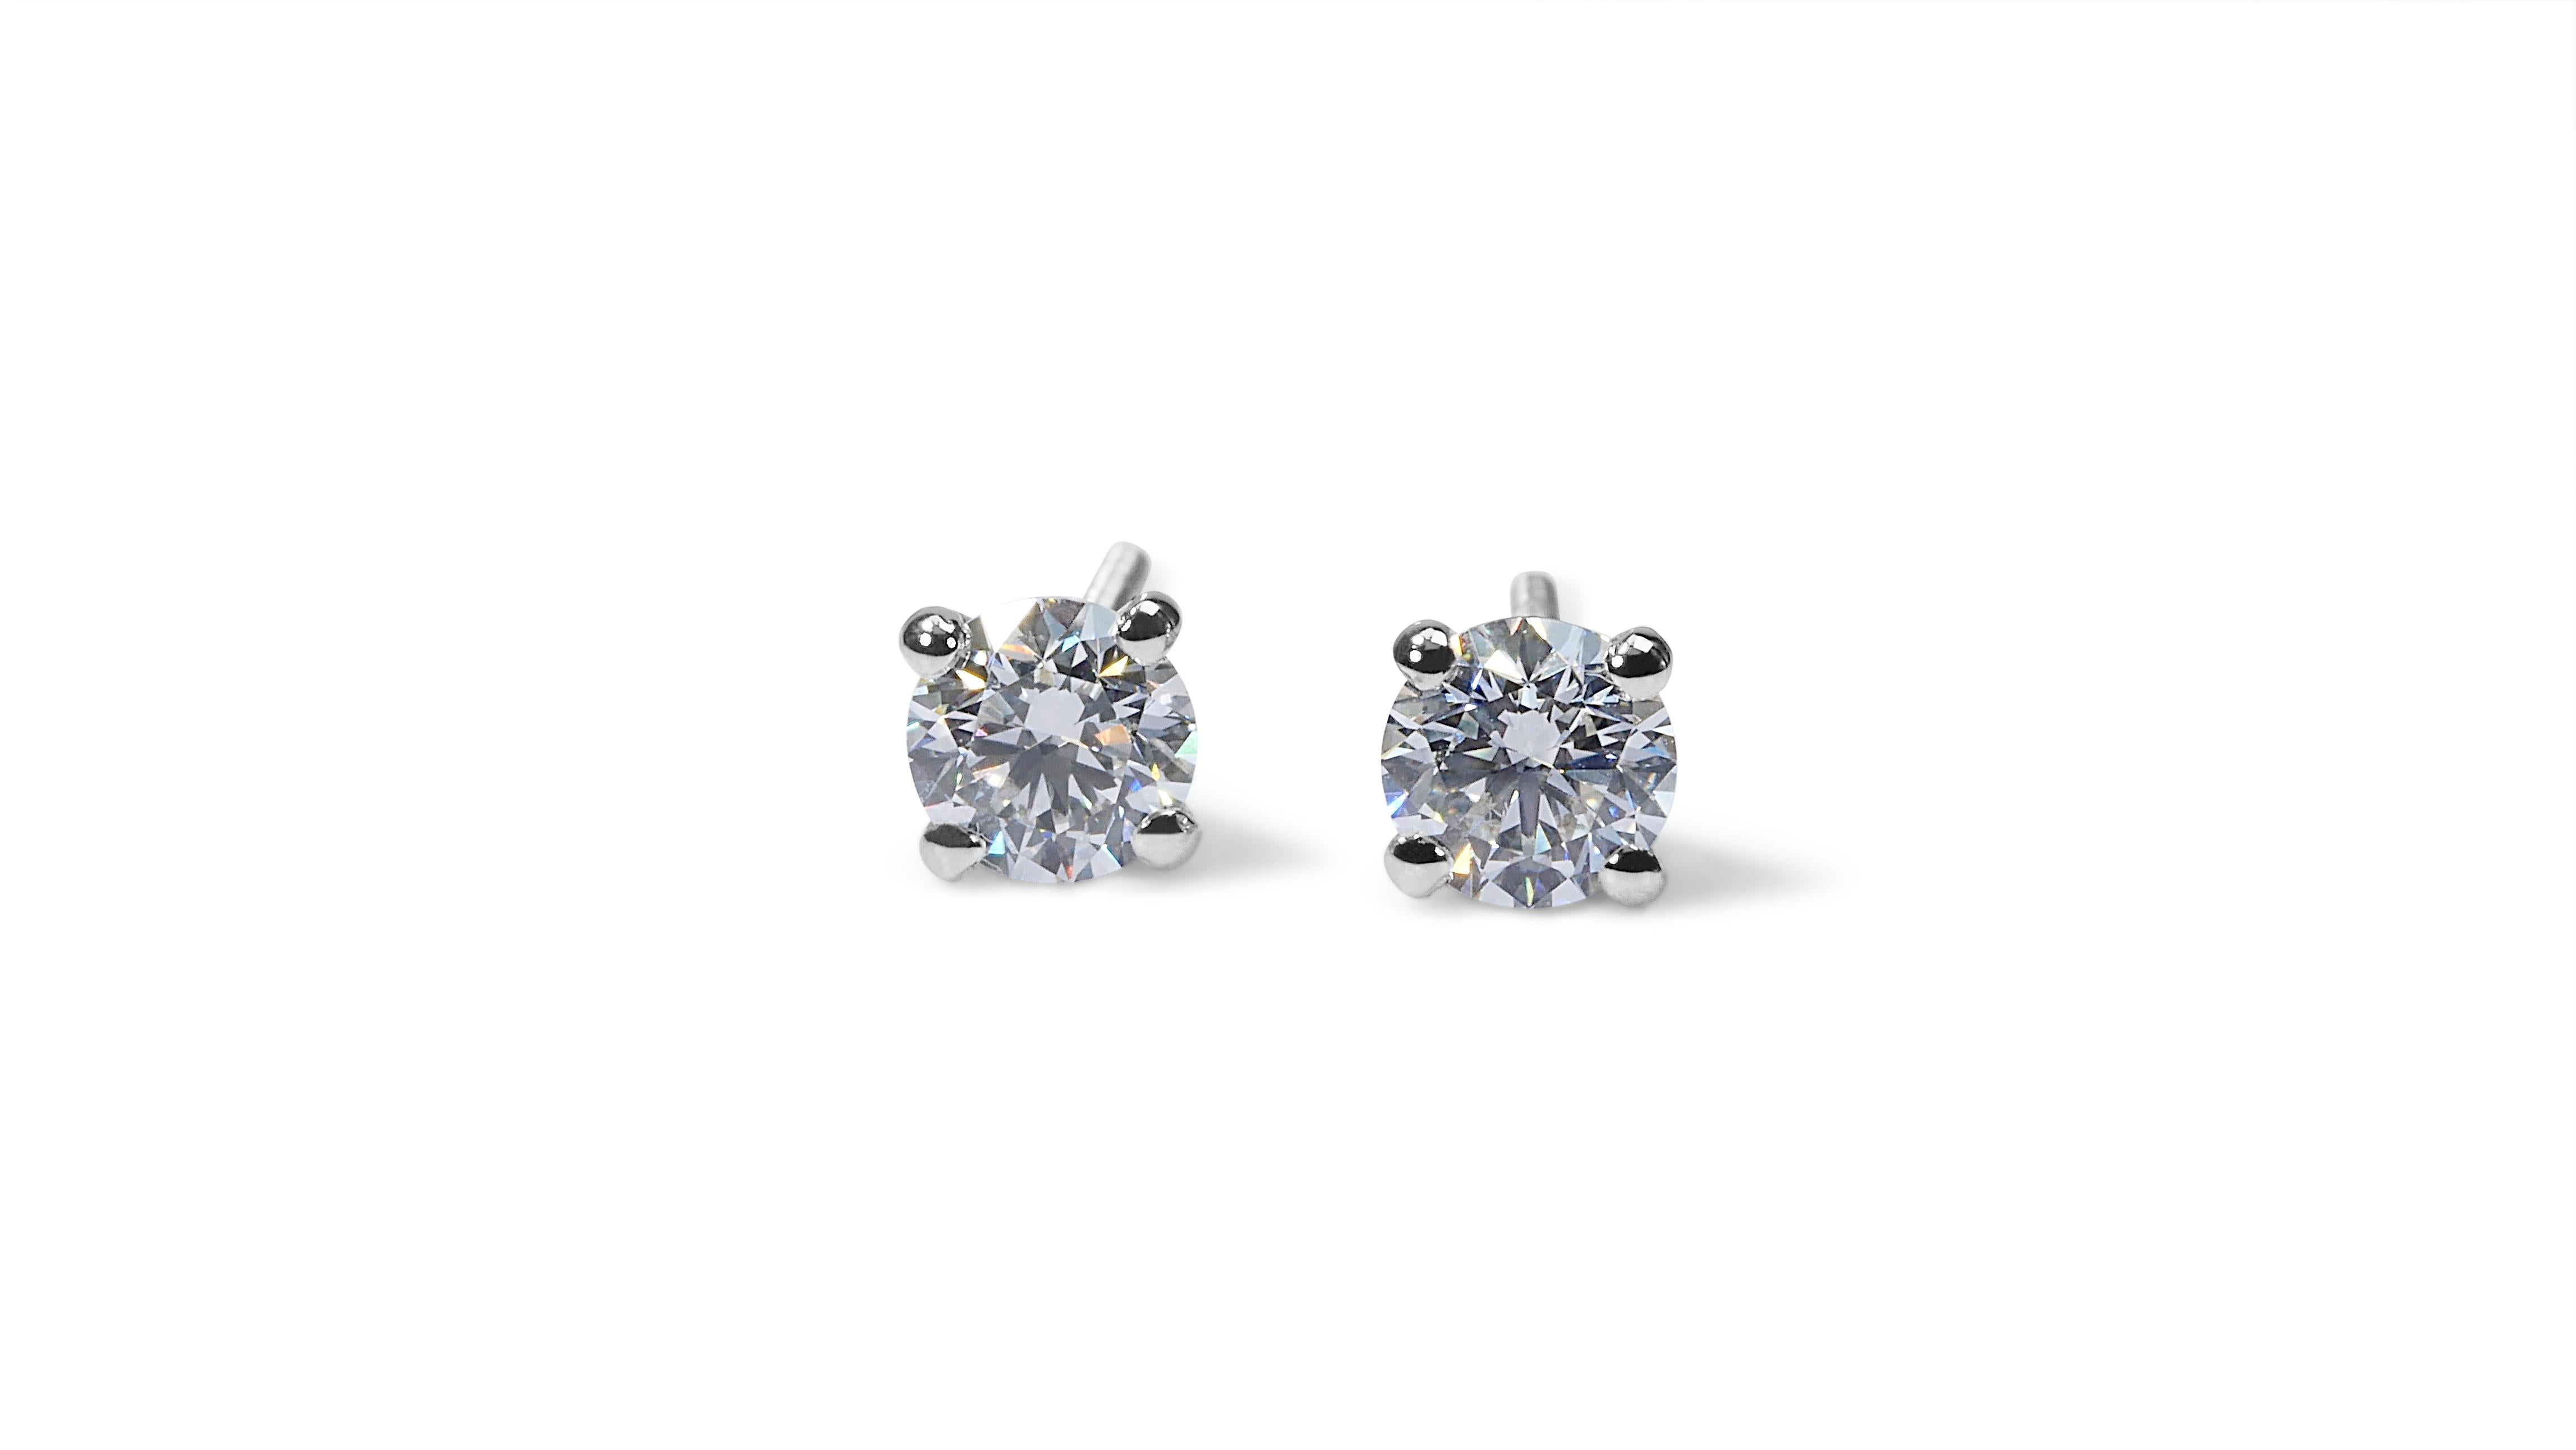 Mesmerizing 2.01ct Diamond Stud Earrings in 18k White Gold - GIA Certified 

Experience timeless elegance with these classic diamond stud earrings, set in 18k white gold. The main stones consist of 2 round diamonds with a combined total carat weight